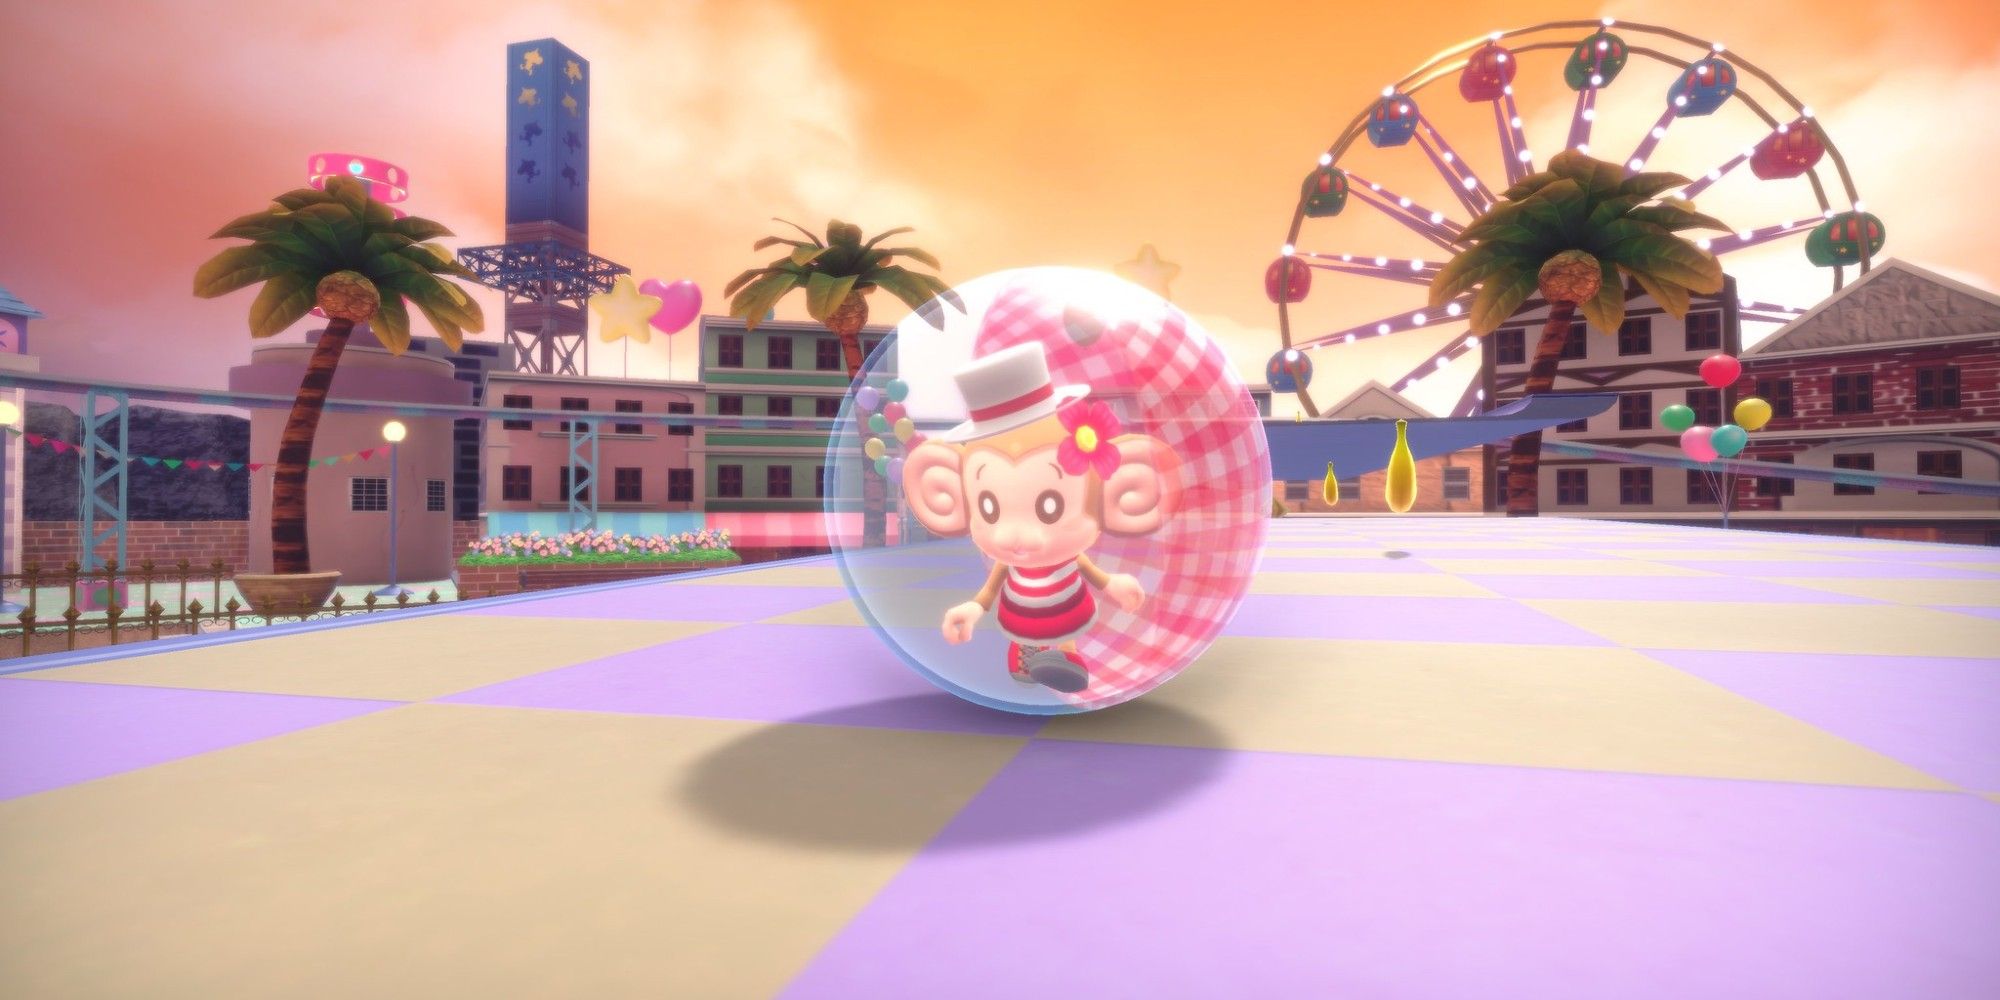 Super Monkey Ball's MeeMee in front of a carousel and palm trees